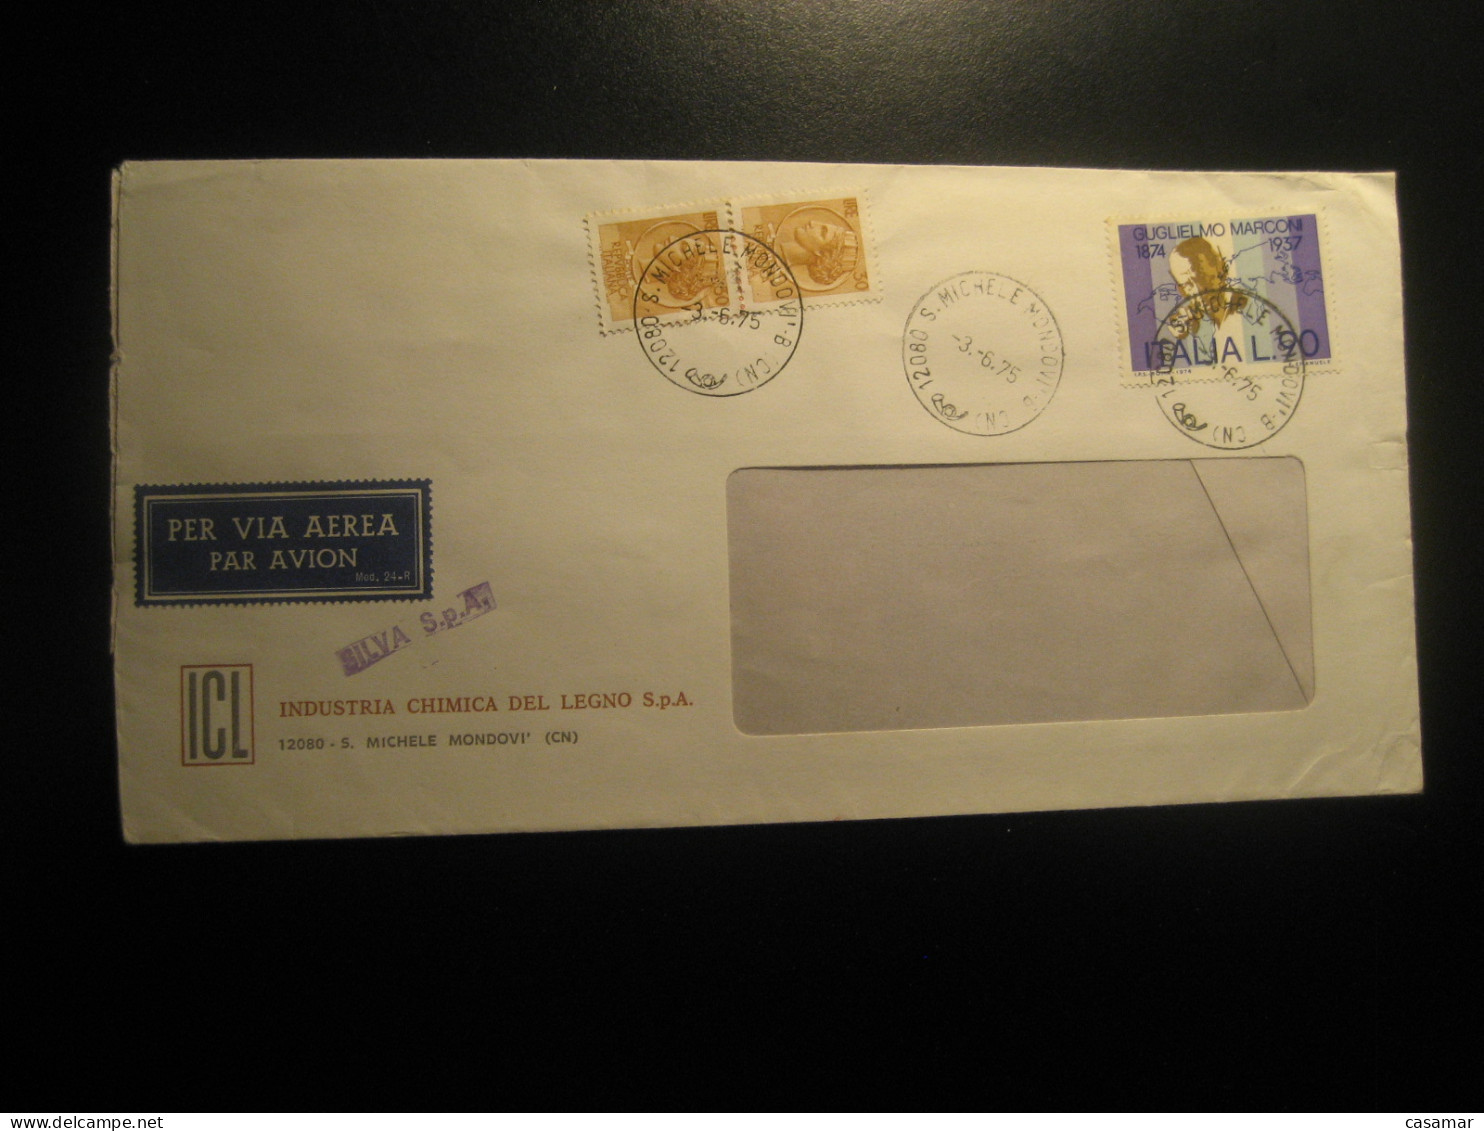 S. MICHELE MONDOVI 1975 Industria Quimica Del Legno Leather Cuir Chemical Chemistry Air Mail Cancel Cover ITALY - Chemie